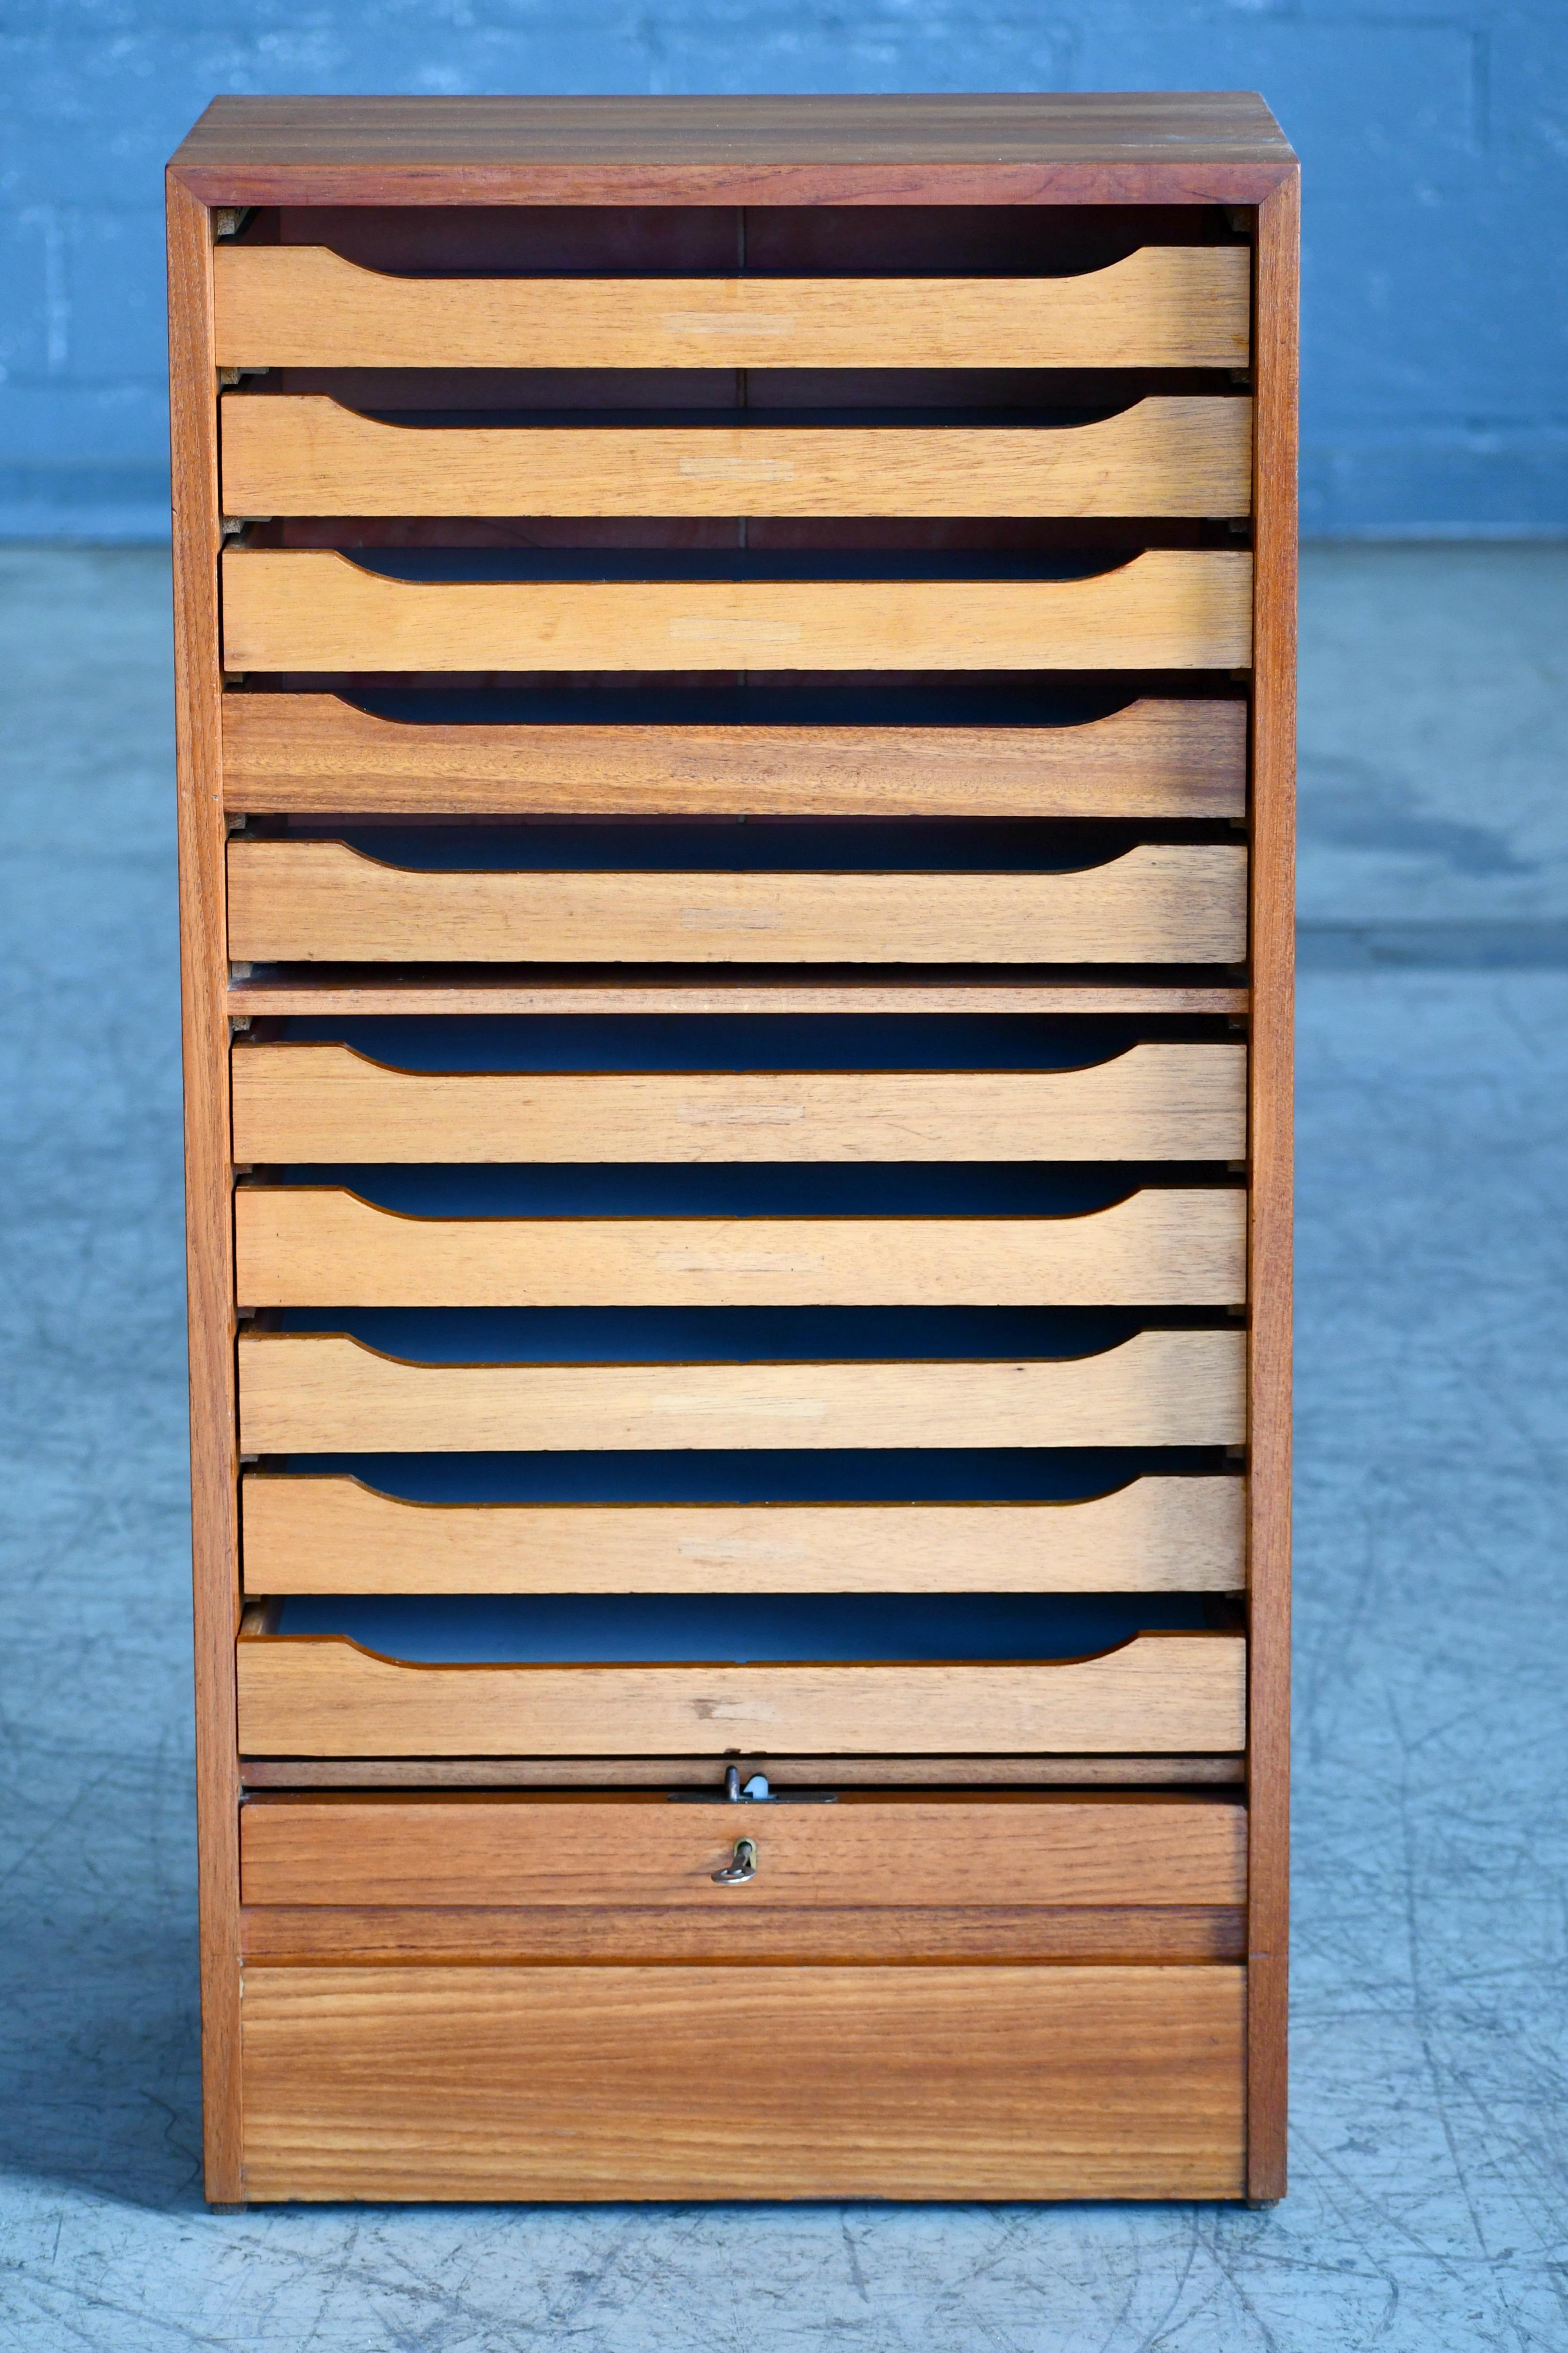 Handsome and versatile high-quality file cabinet in teak made in Denmark in the 1950s. The front has a pull-up tambour door that is lockable with key. Great color and grain and just minor natural age wear including a few minor nicks to the back